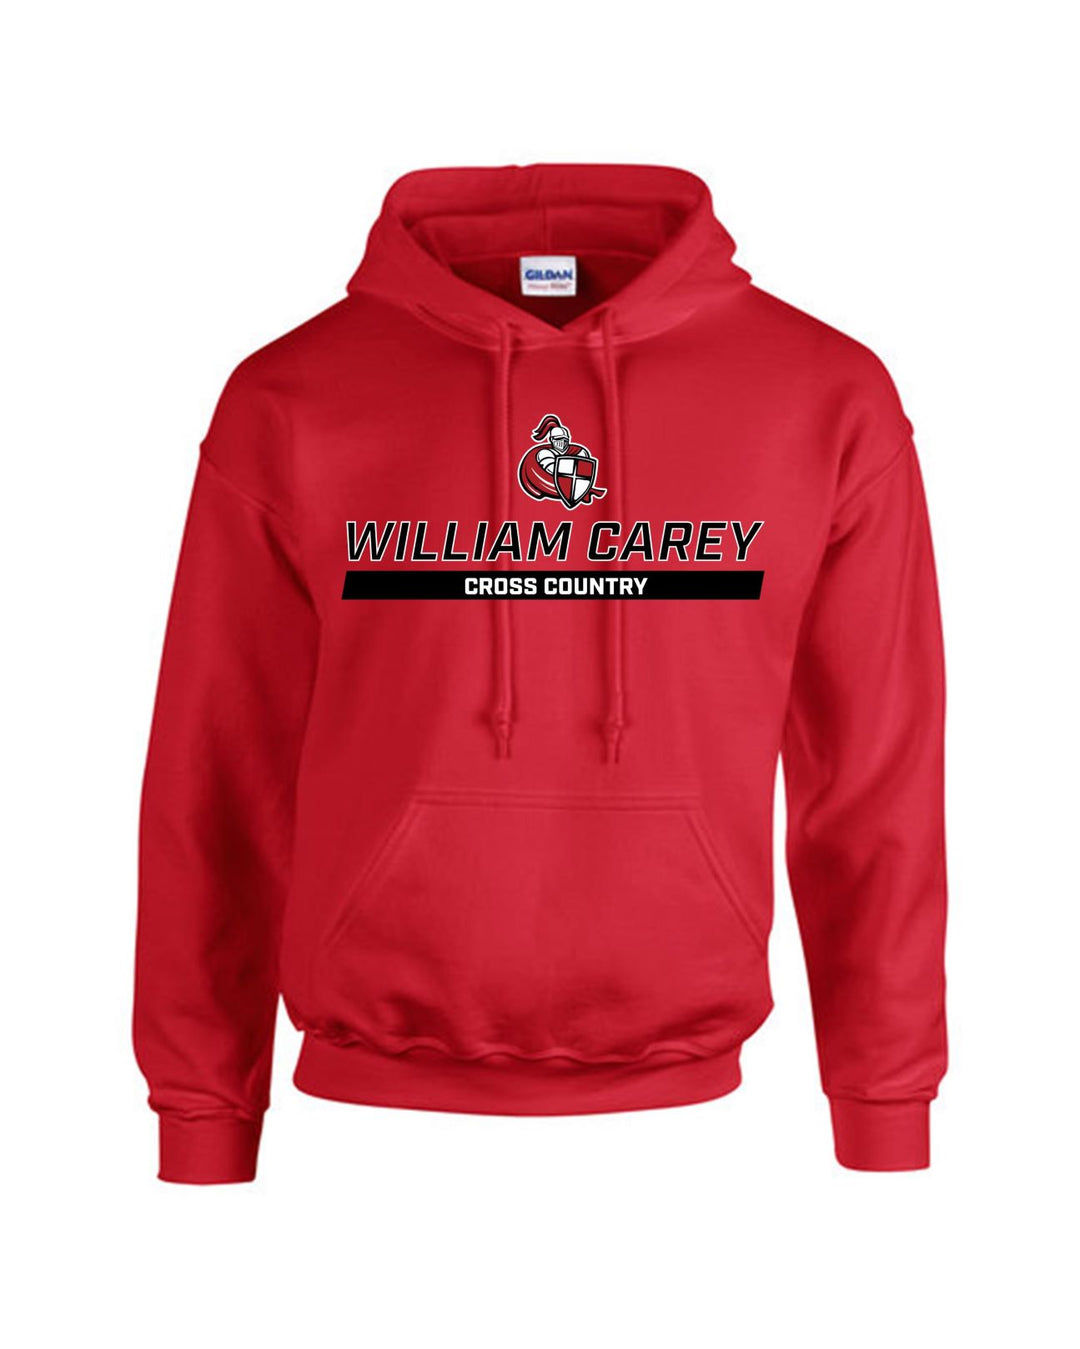 Carey Cross Country Youth Hoody WCU Cross Country Red WC W/Crusader - Third Coast Soccer